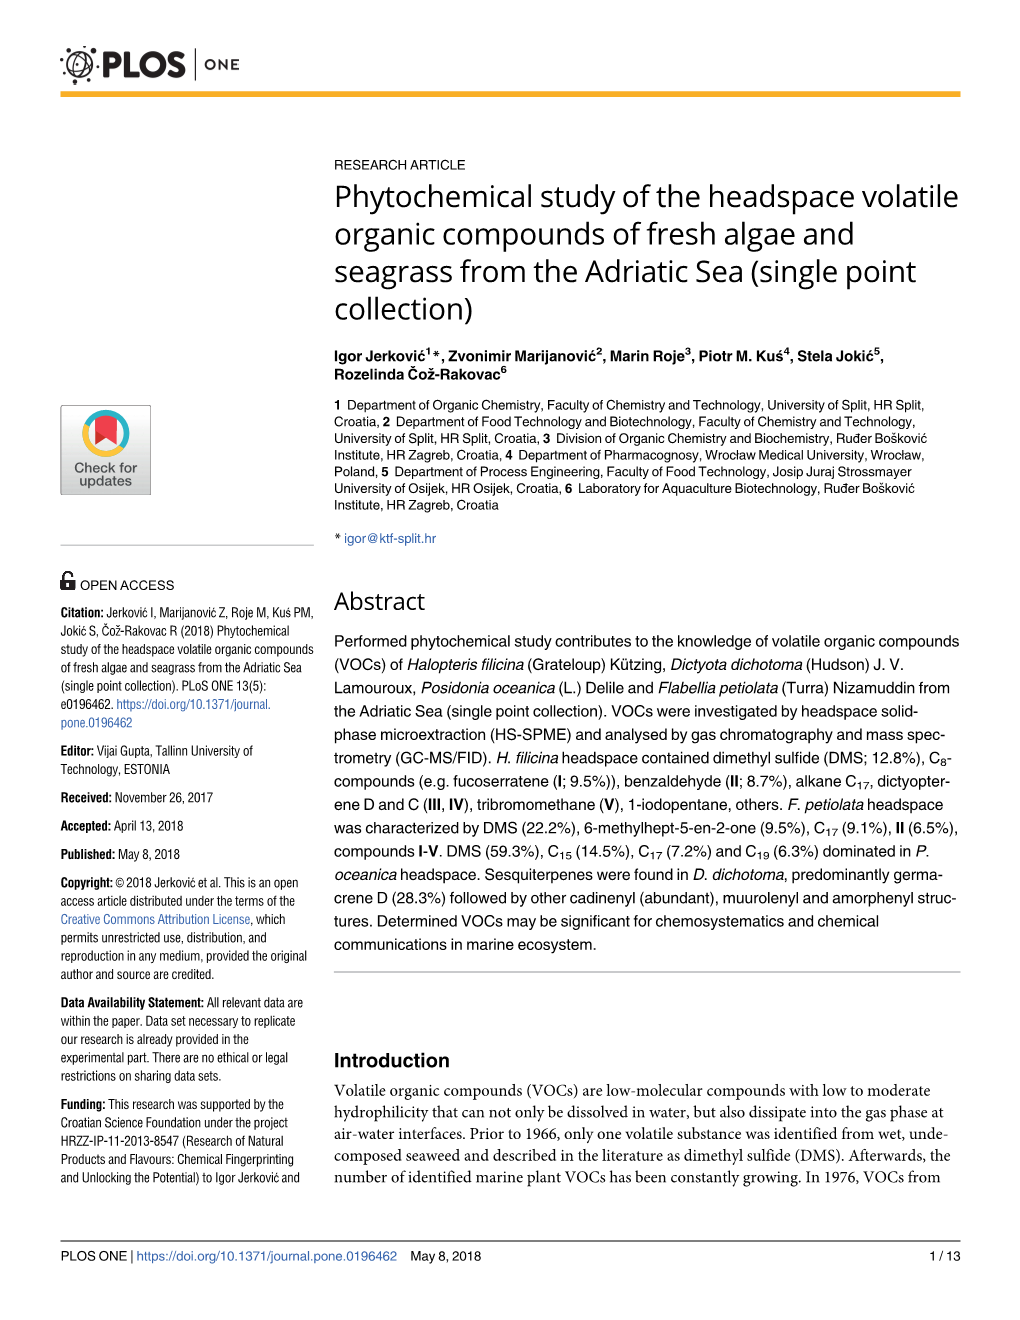 Phytochemical Study of the Headspace Volatile Organic Compounds of Fresh Algae and Seagrass from the Adriatic Sea (Single Point Collection)